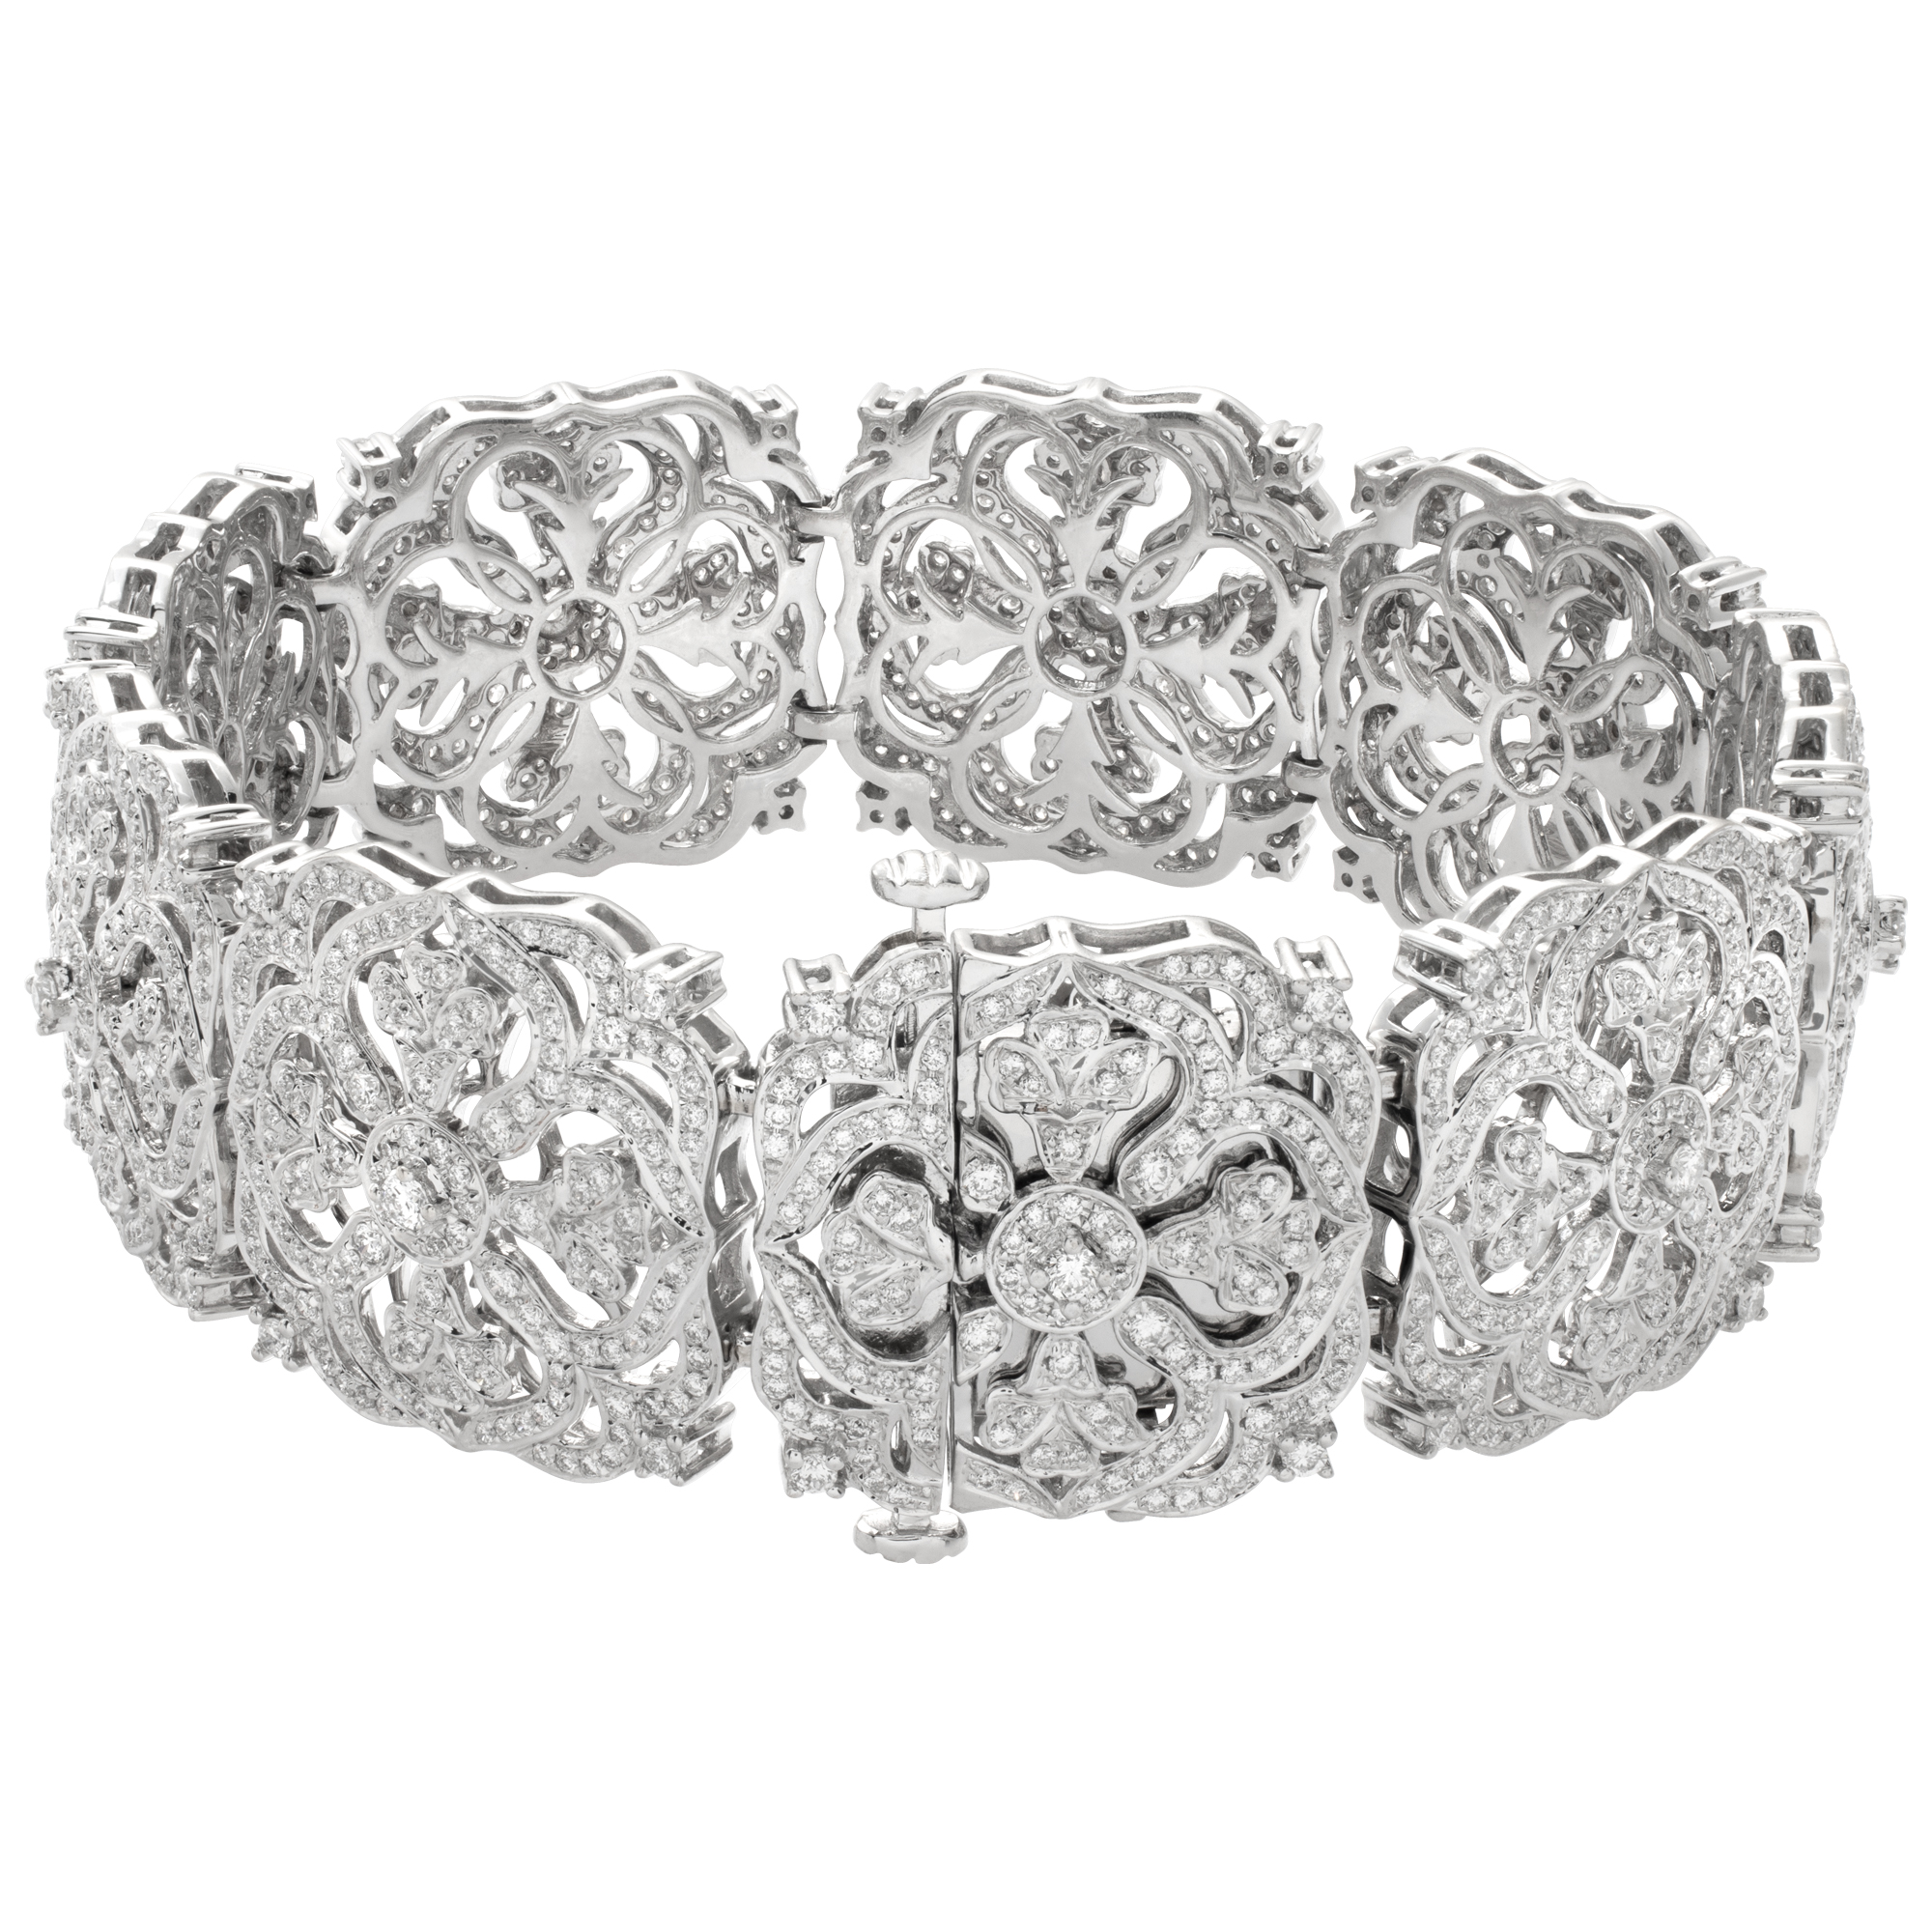 Charles Krypell diamond pave floral amulet bracelet in 18k white gold with approximately 9 carats in G-H, VS diamonds image 3